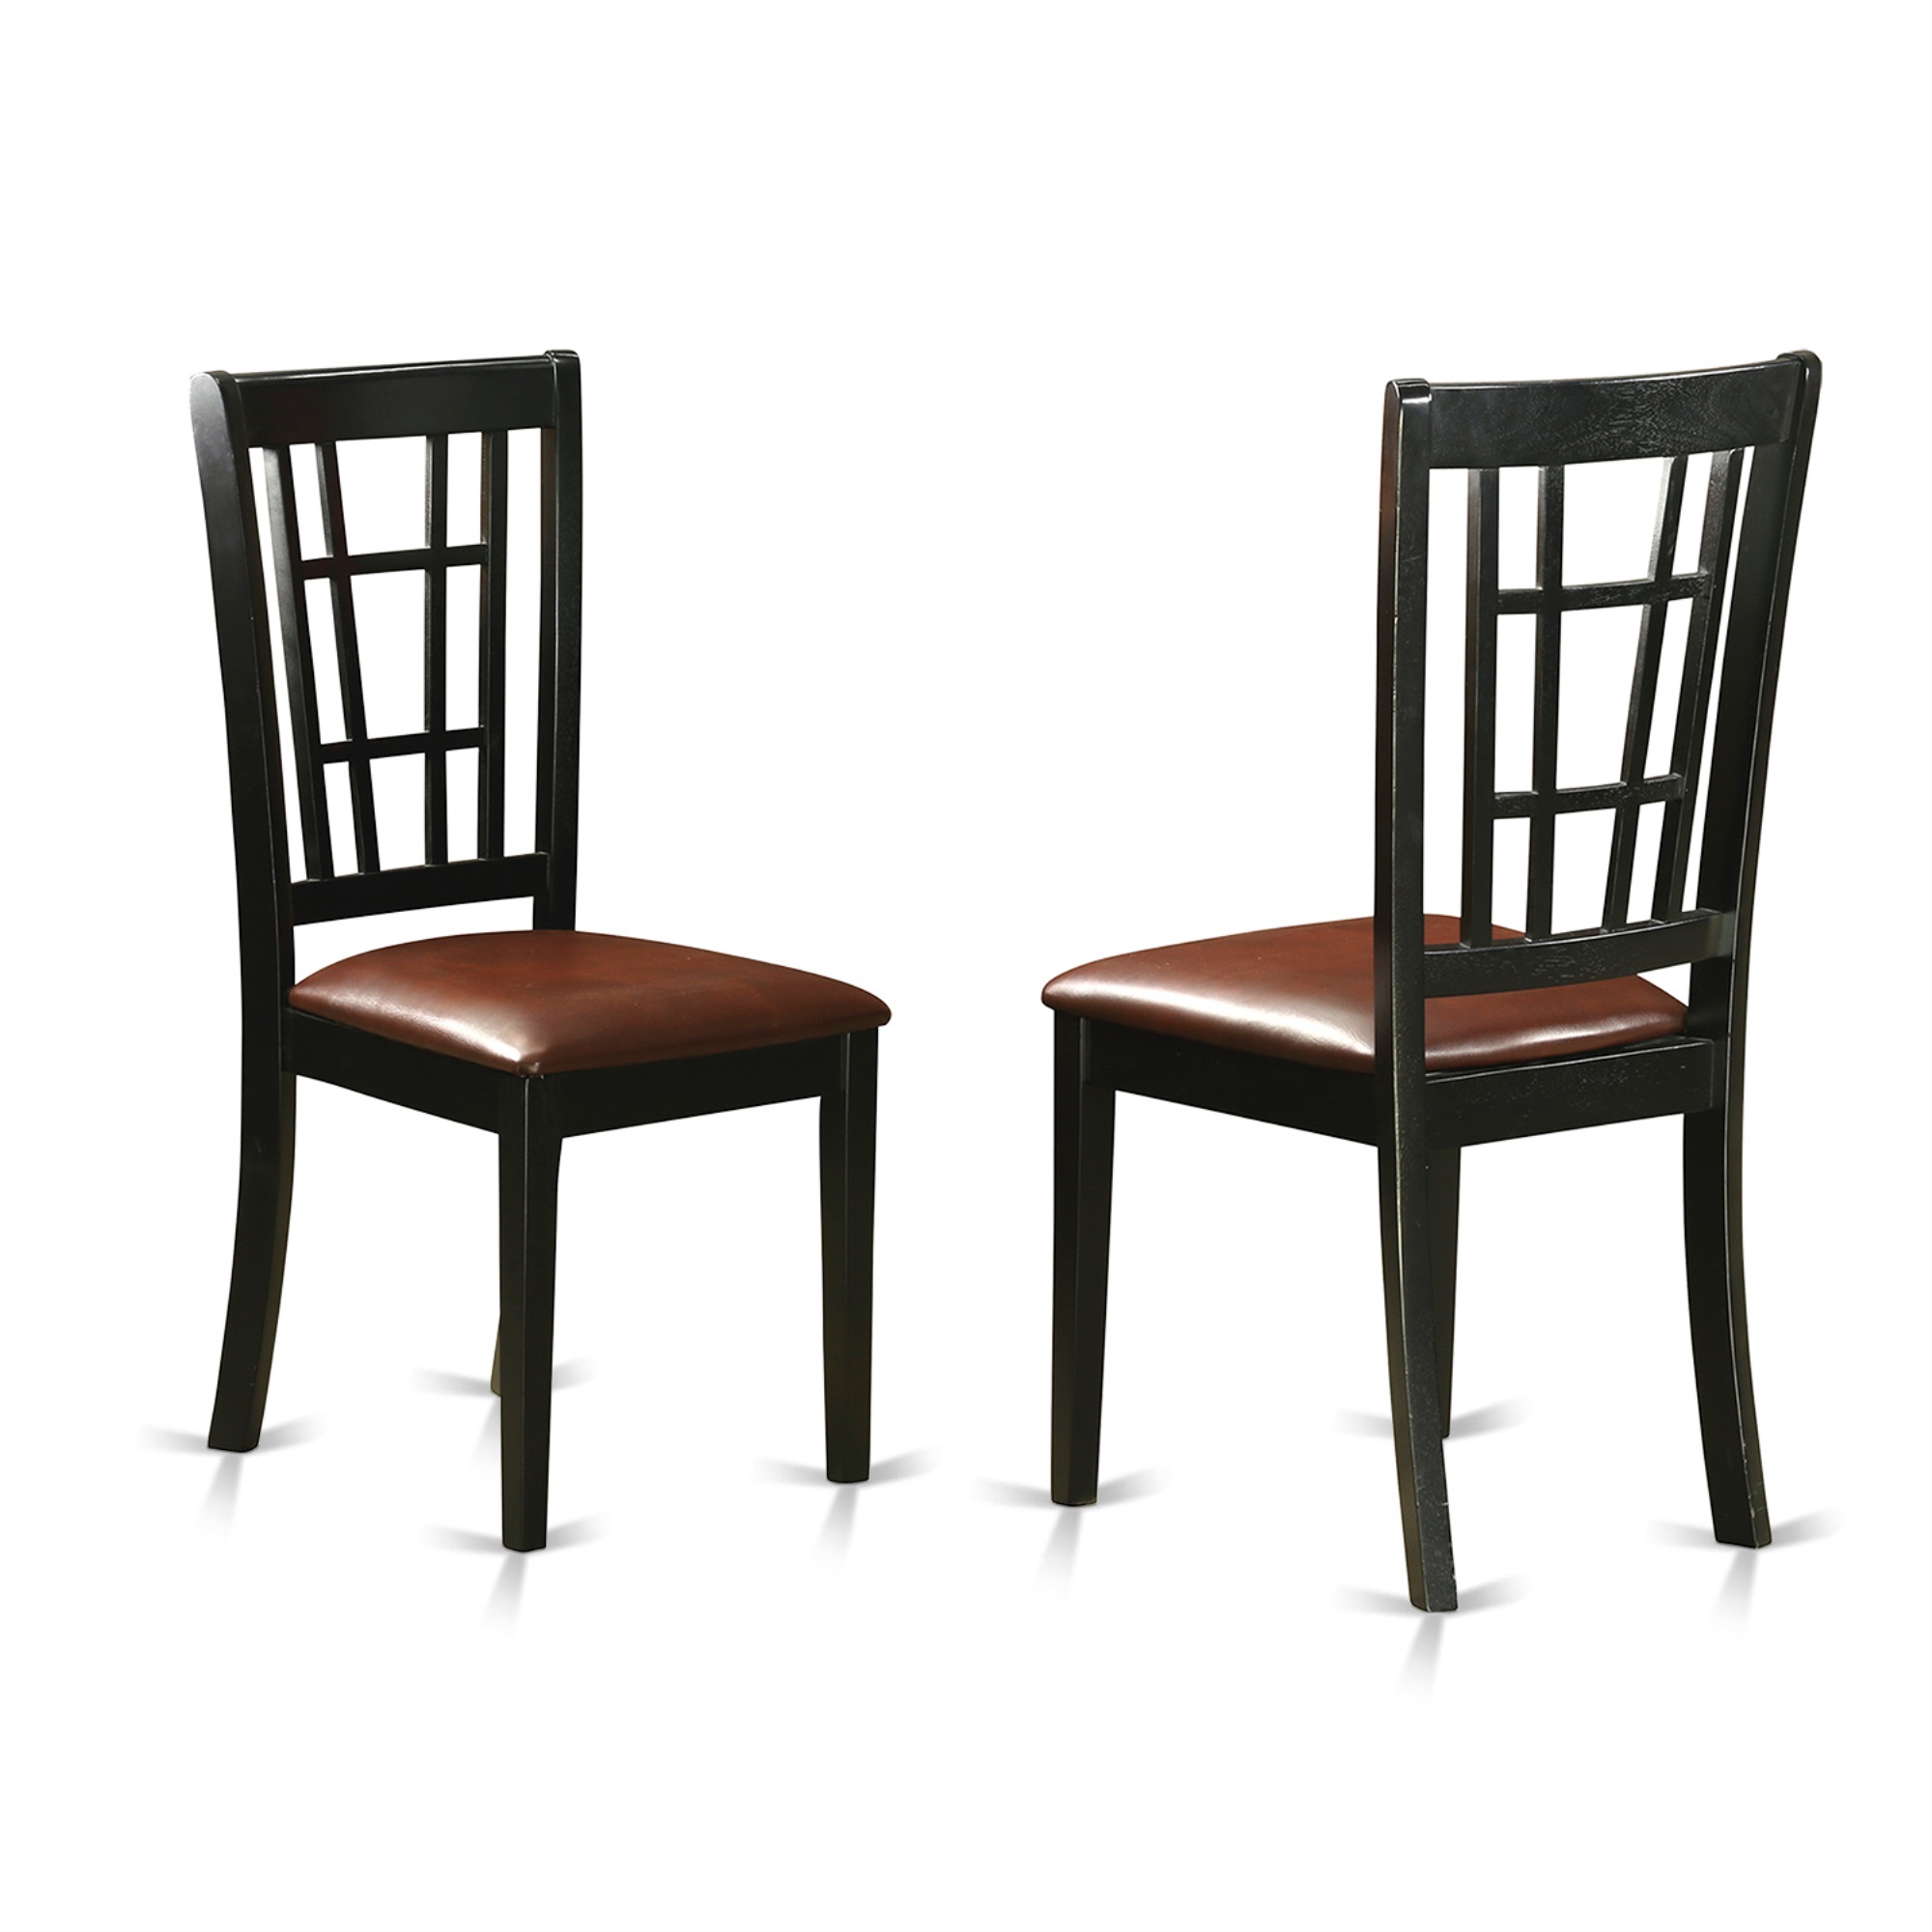 East West Furniture LGNI5-BCH-LC 5 Pc Dining room set with a Dining Table and 4 Dining Chairs in Black and Cherry